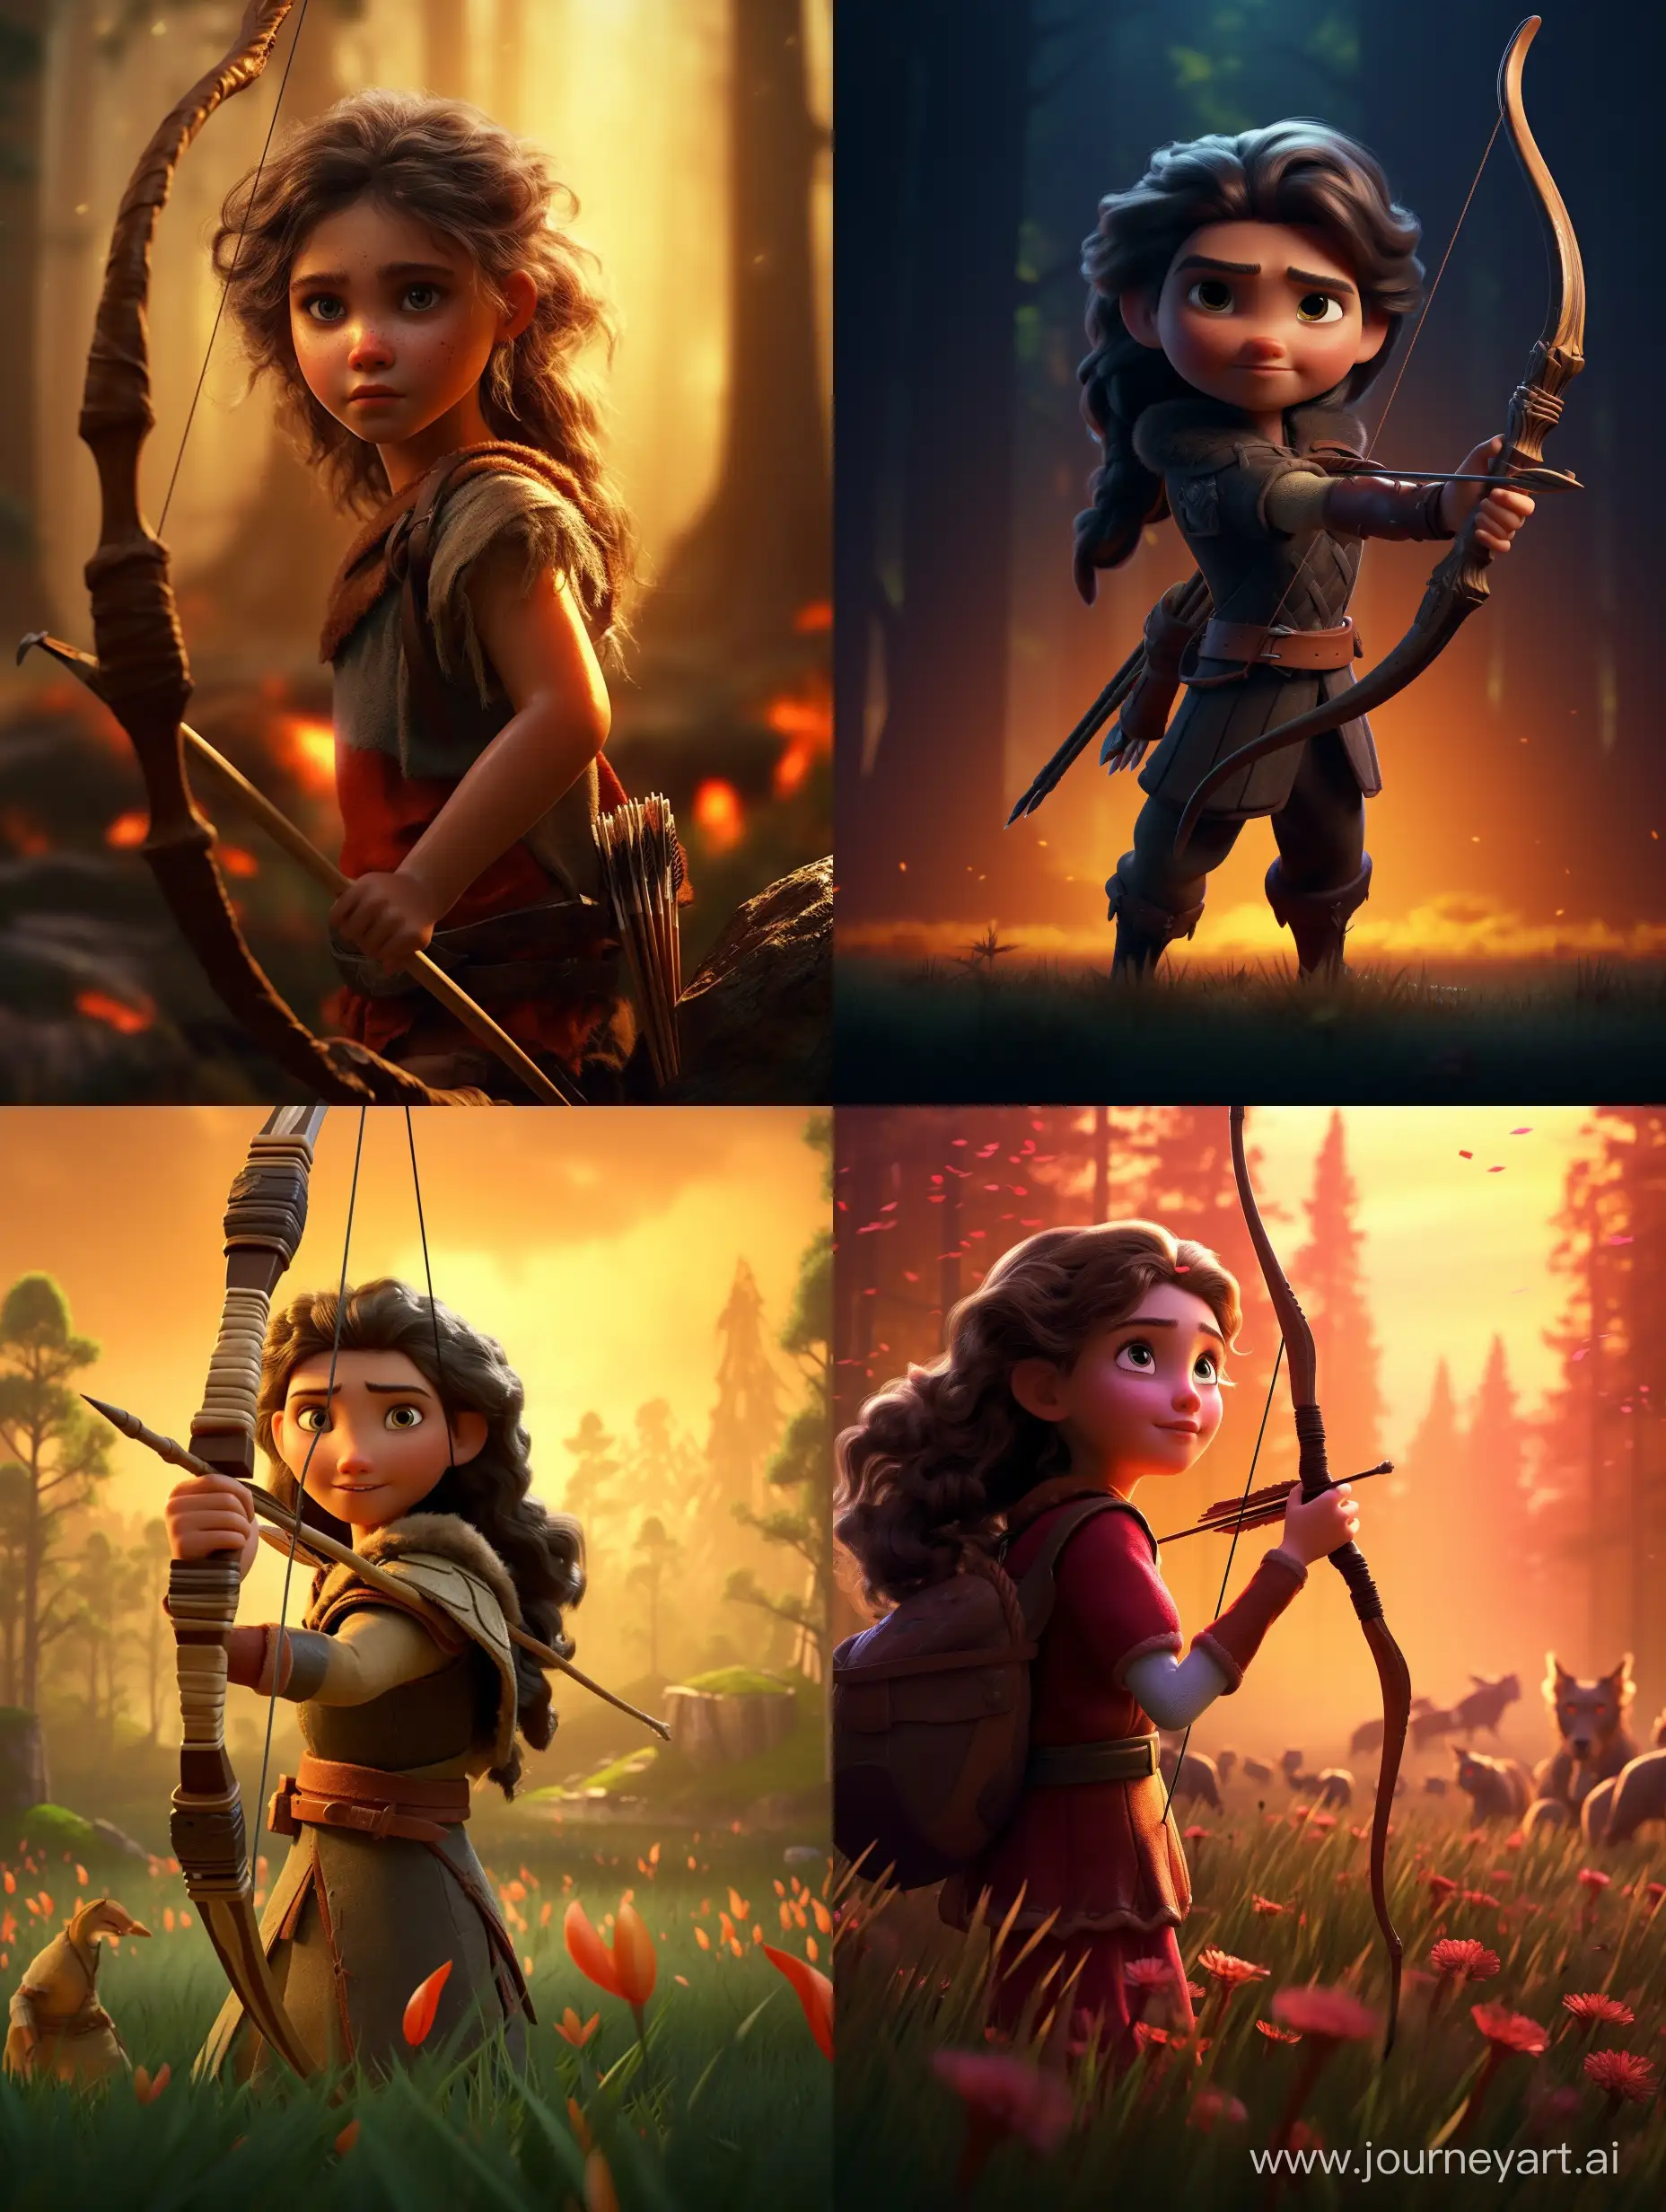 Ancient-Bow-and-Arrow-Hunting-in-Pixar-Style